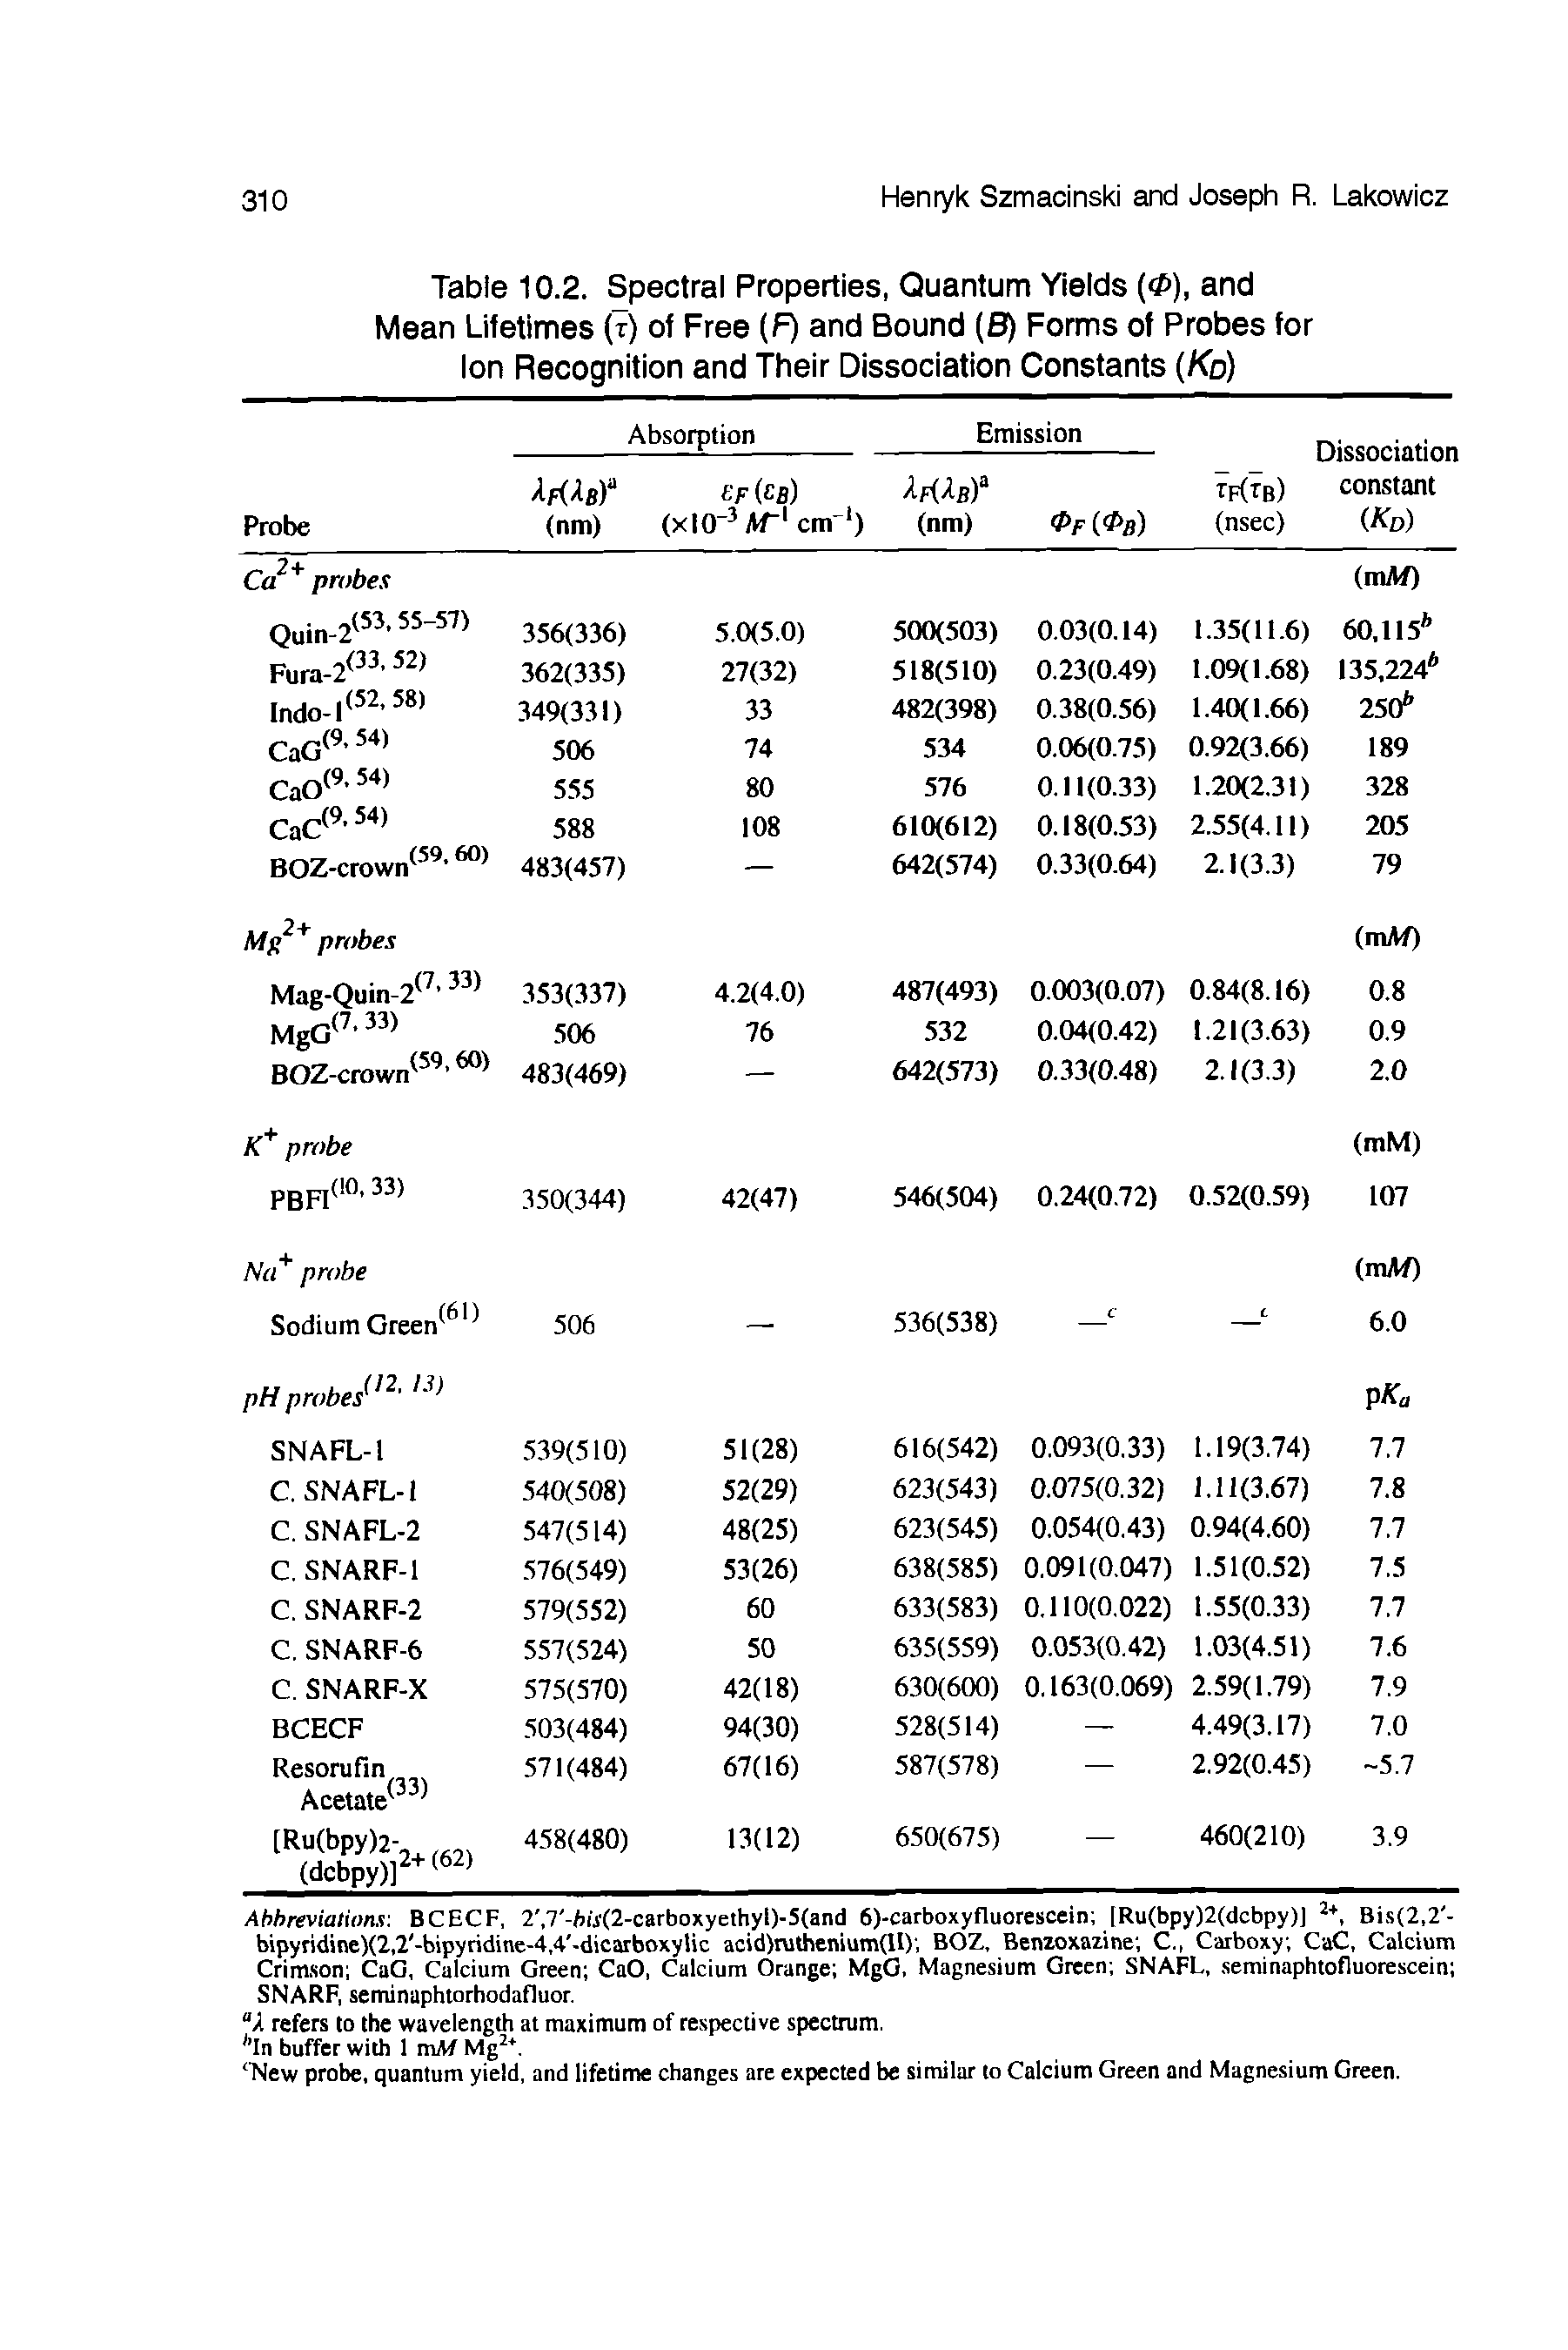 Table 10.2. Spectral Properties, Quantum Yields (< ), and Mean Lifetimes (t) of Free (F) and Bound (B) Forms of Probes for Ion Recognition and Their Dissociation Constants (Kd)...